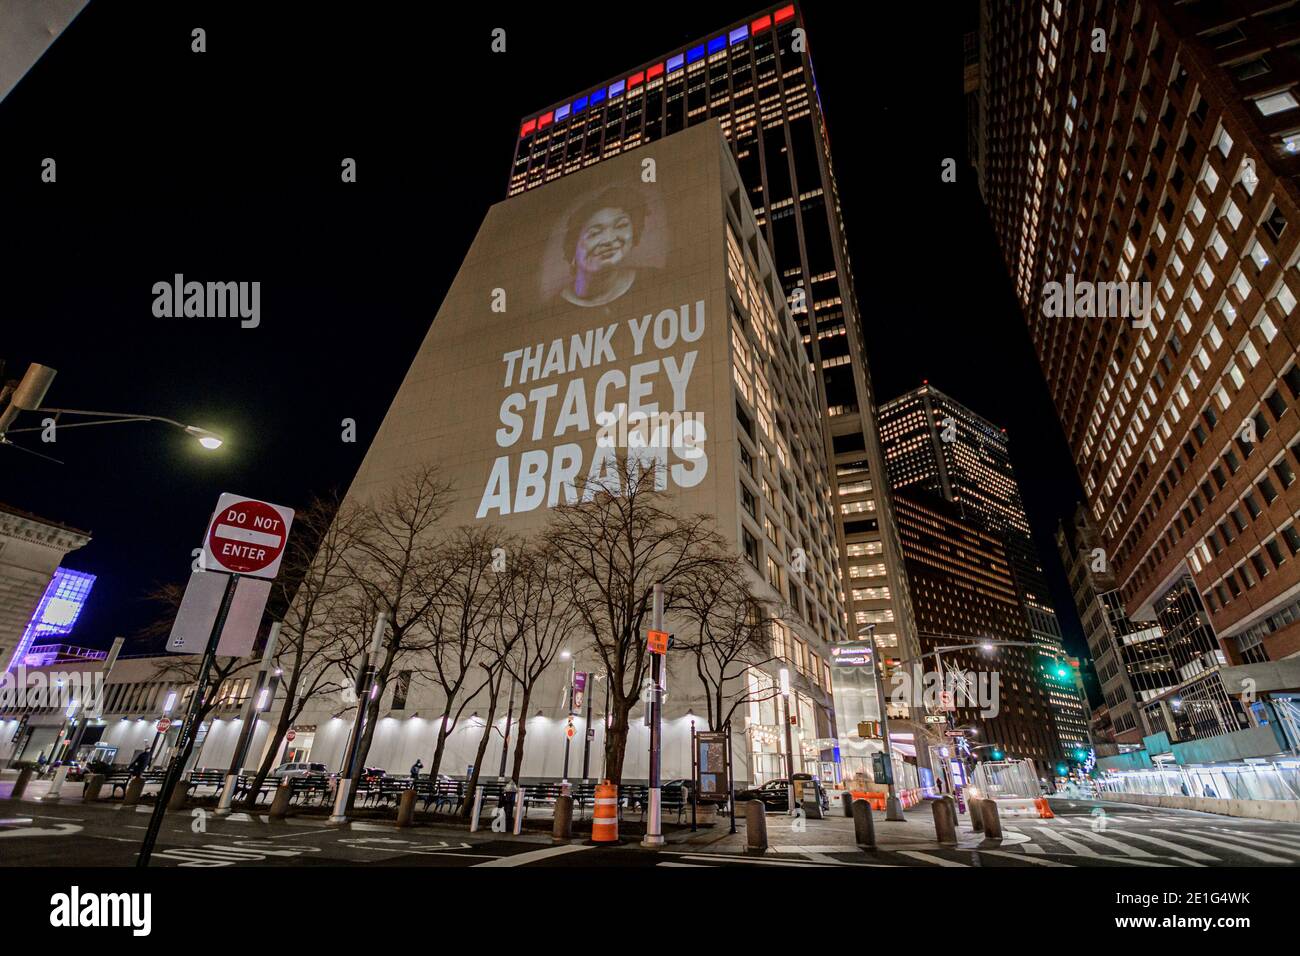 USA. 06th Jan, 2021. Activists with Rainforest Action Network and The Illuminator projected 30ft tall images on the side of a building in the New York financial district on January 6, 2021 with messages celebrating the work of Stacey Abrams on the senate election victories in Georgia. (Photo by Erik McGregor/Sipa USA) Credit: Sipa USA/Alamy Live News Stock Photo